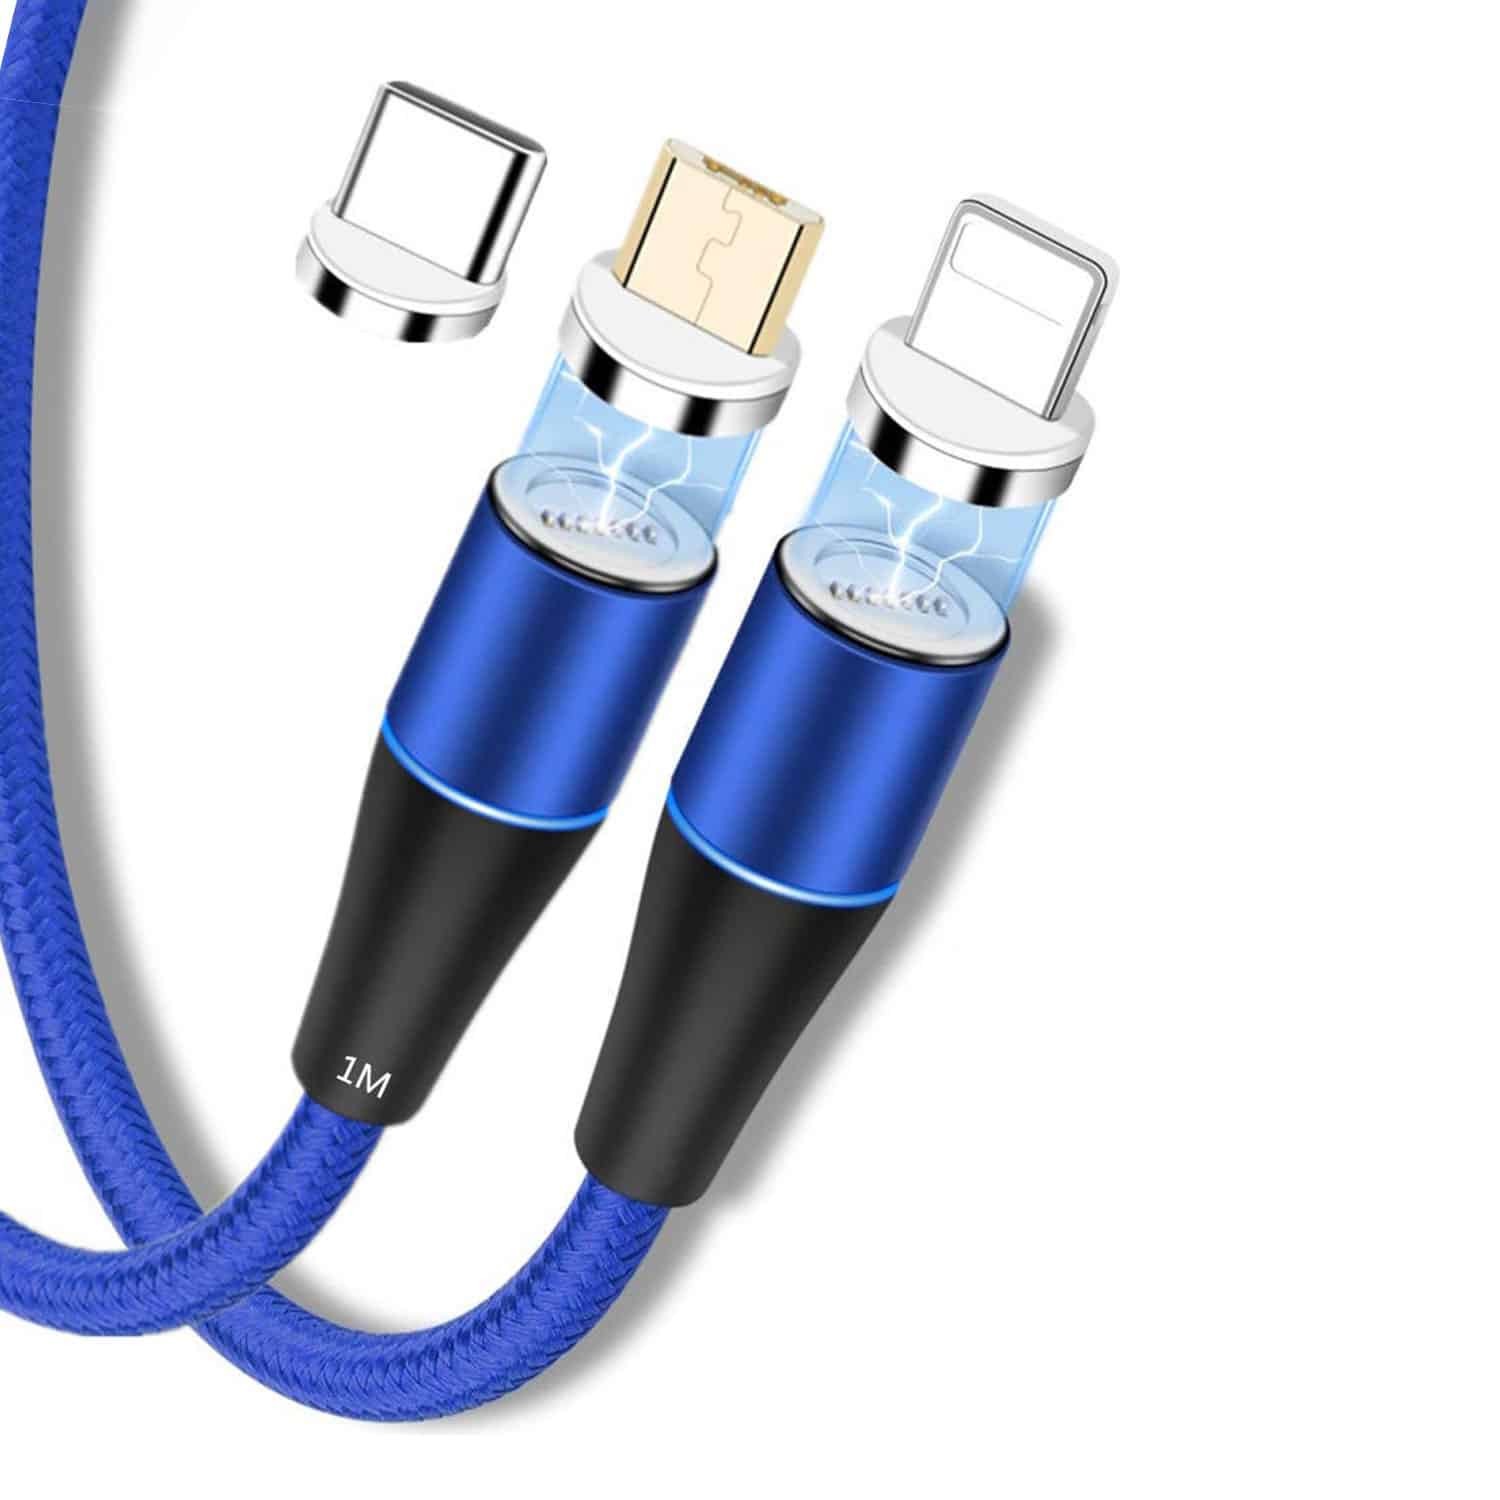 FlinQ-Magnetic-Cable-Charger-USB-4